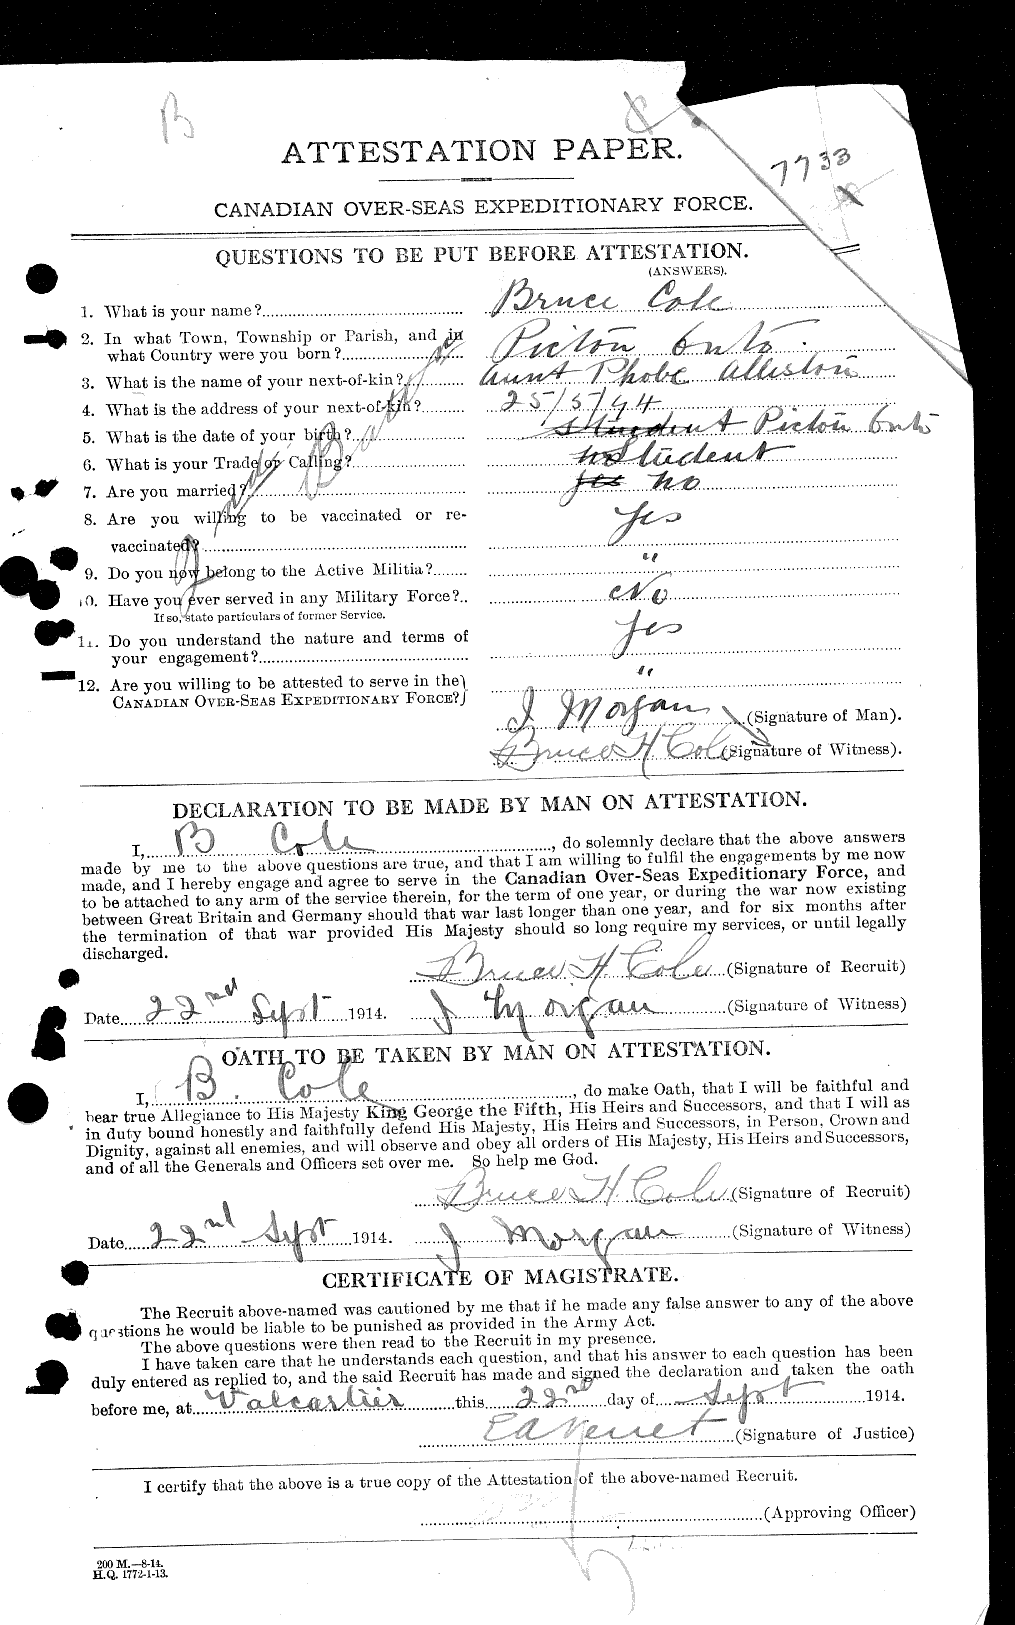 Personnel Records of the First World War - CEF 027626a